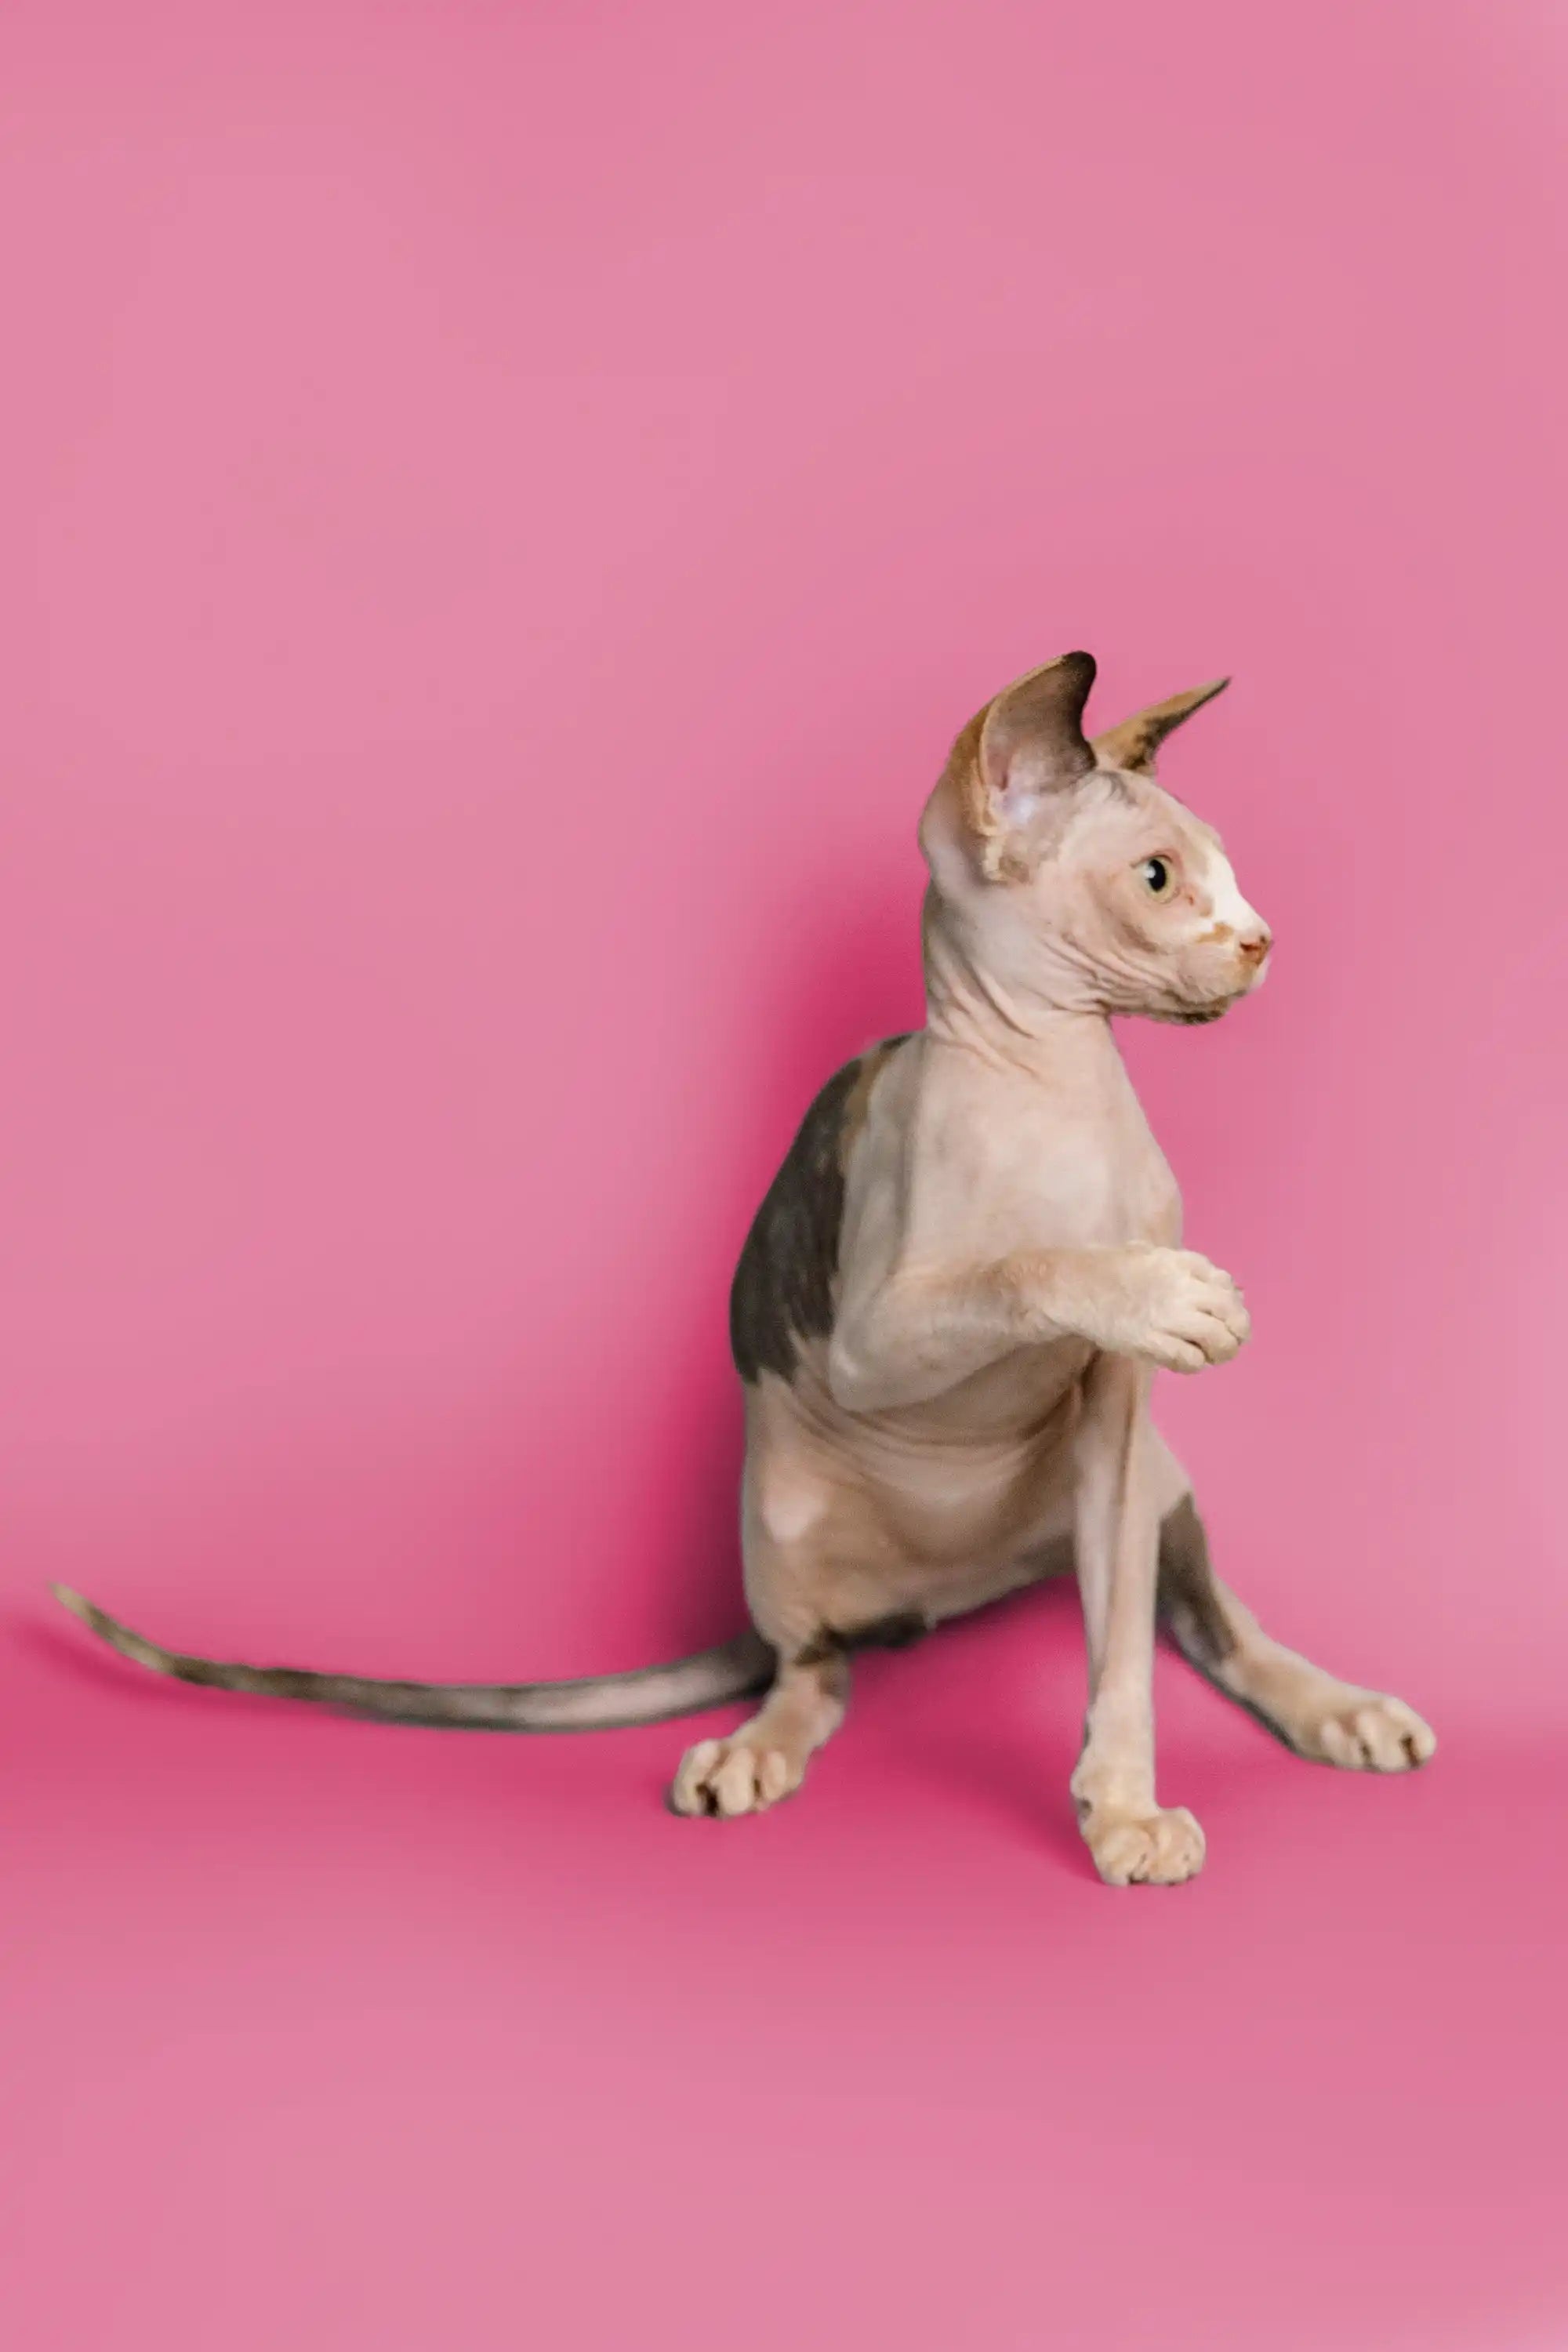 Sphynx Cats and Kittens for Sale Gladis| Kitten